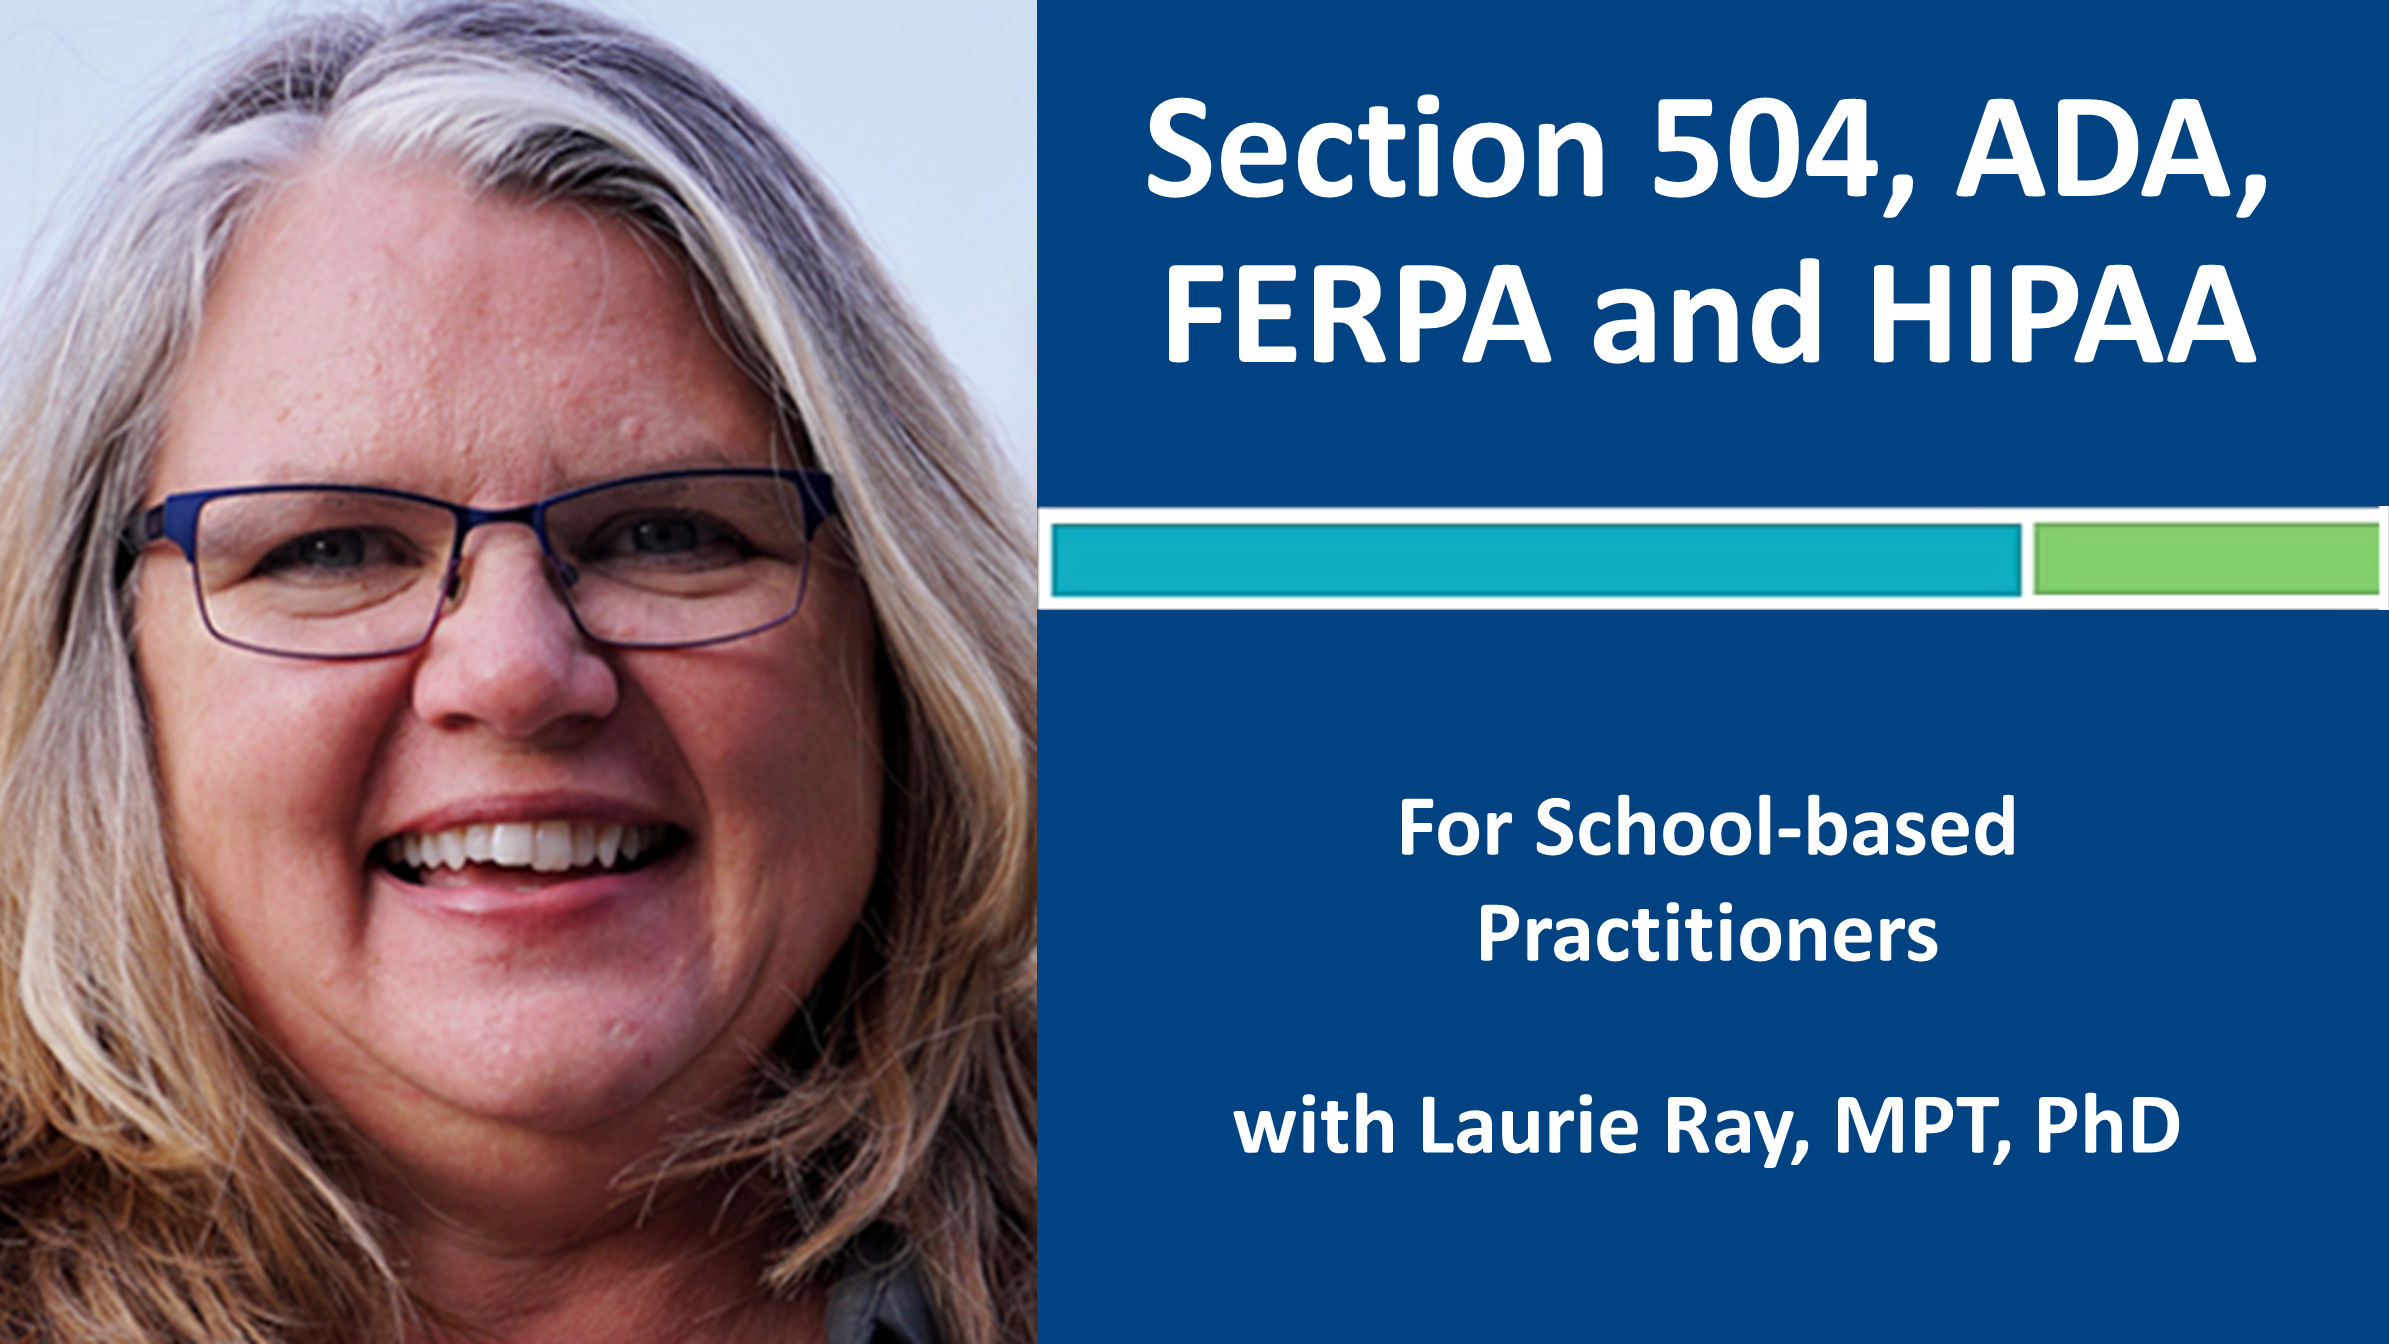 Webinar 4: Section 504, ADA, FERPA and HIPAA with Laurie Ray, MPT, PhD